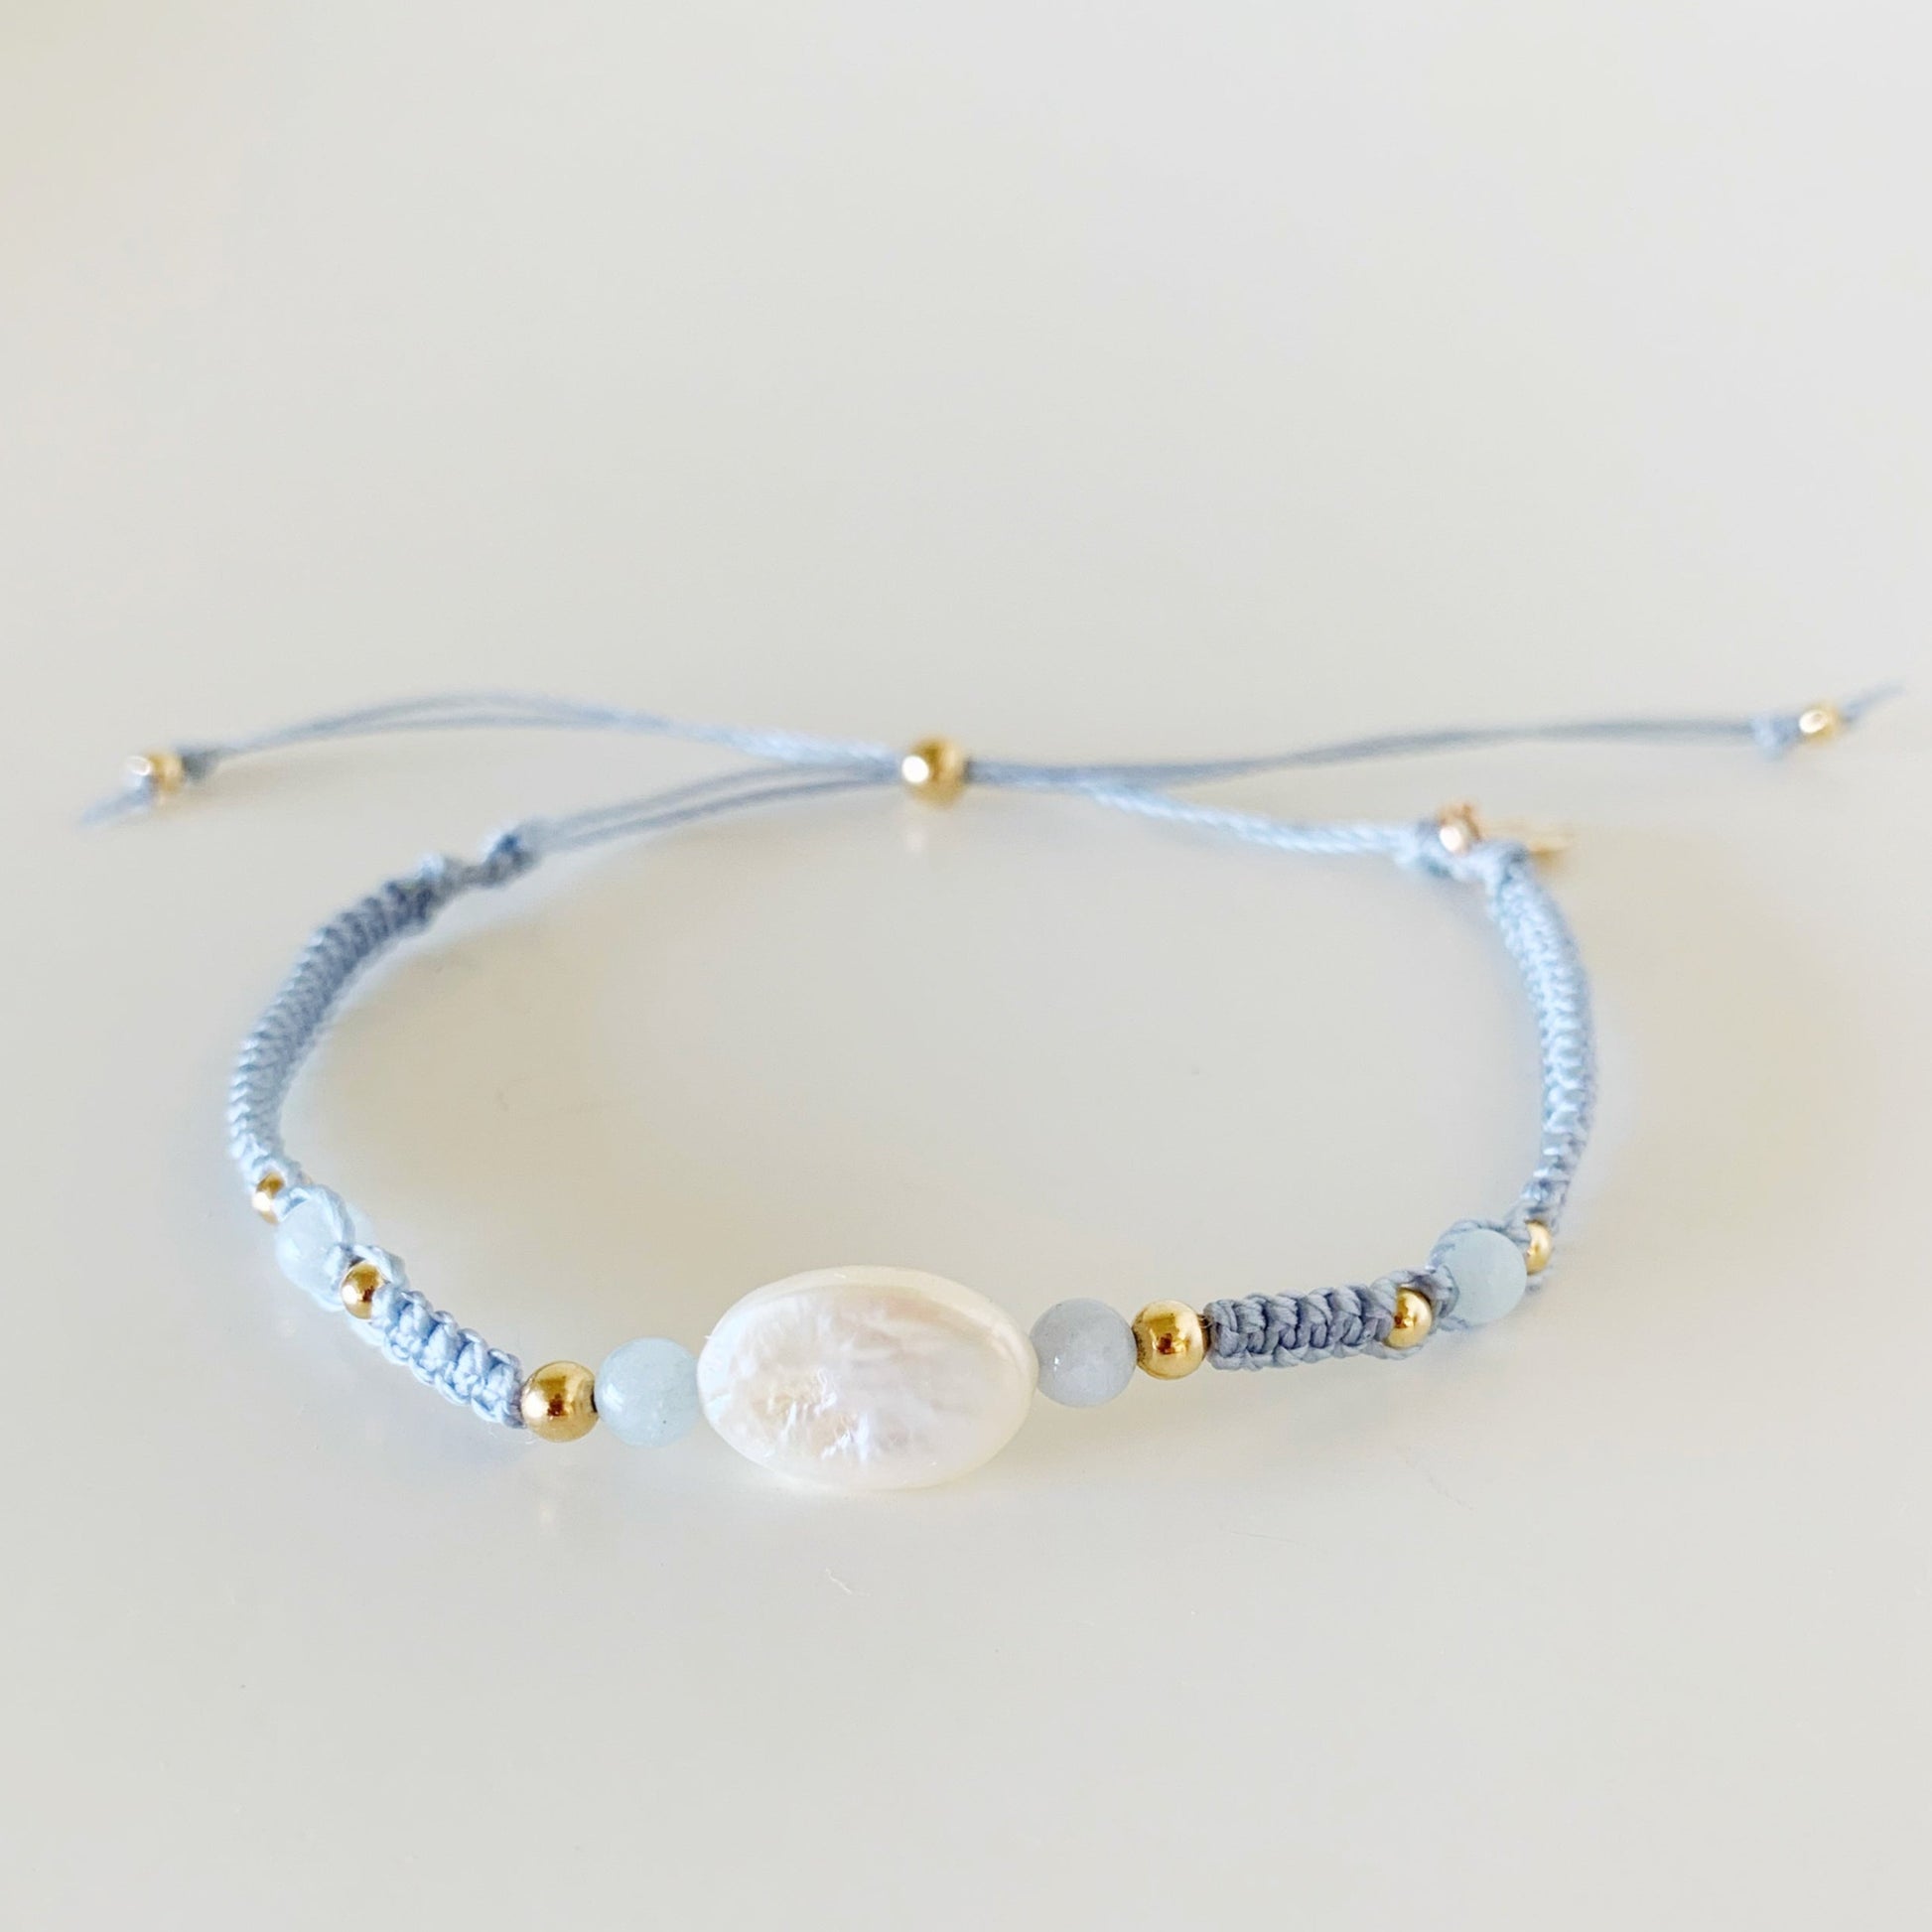 the regal seagull bracelet by mermaids and madeleines is an adjustable style macrame bracelet designed with blueish gray cord with a freshwater oval pearl at the center and 4mm aquamarine beads on either side. this bracelet is photographed from the front on a white surface